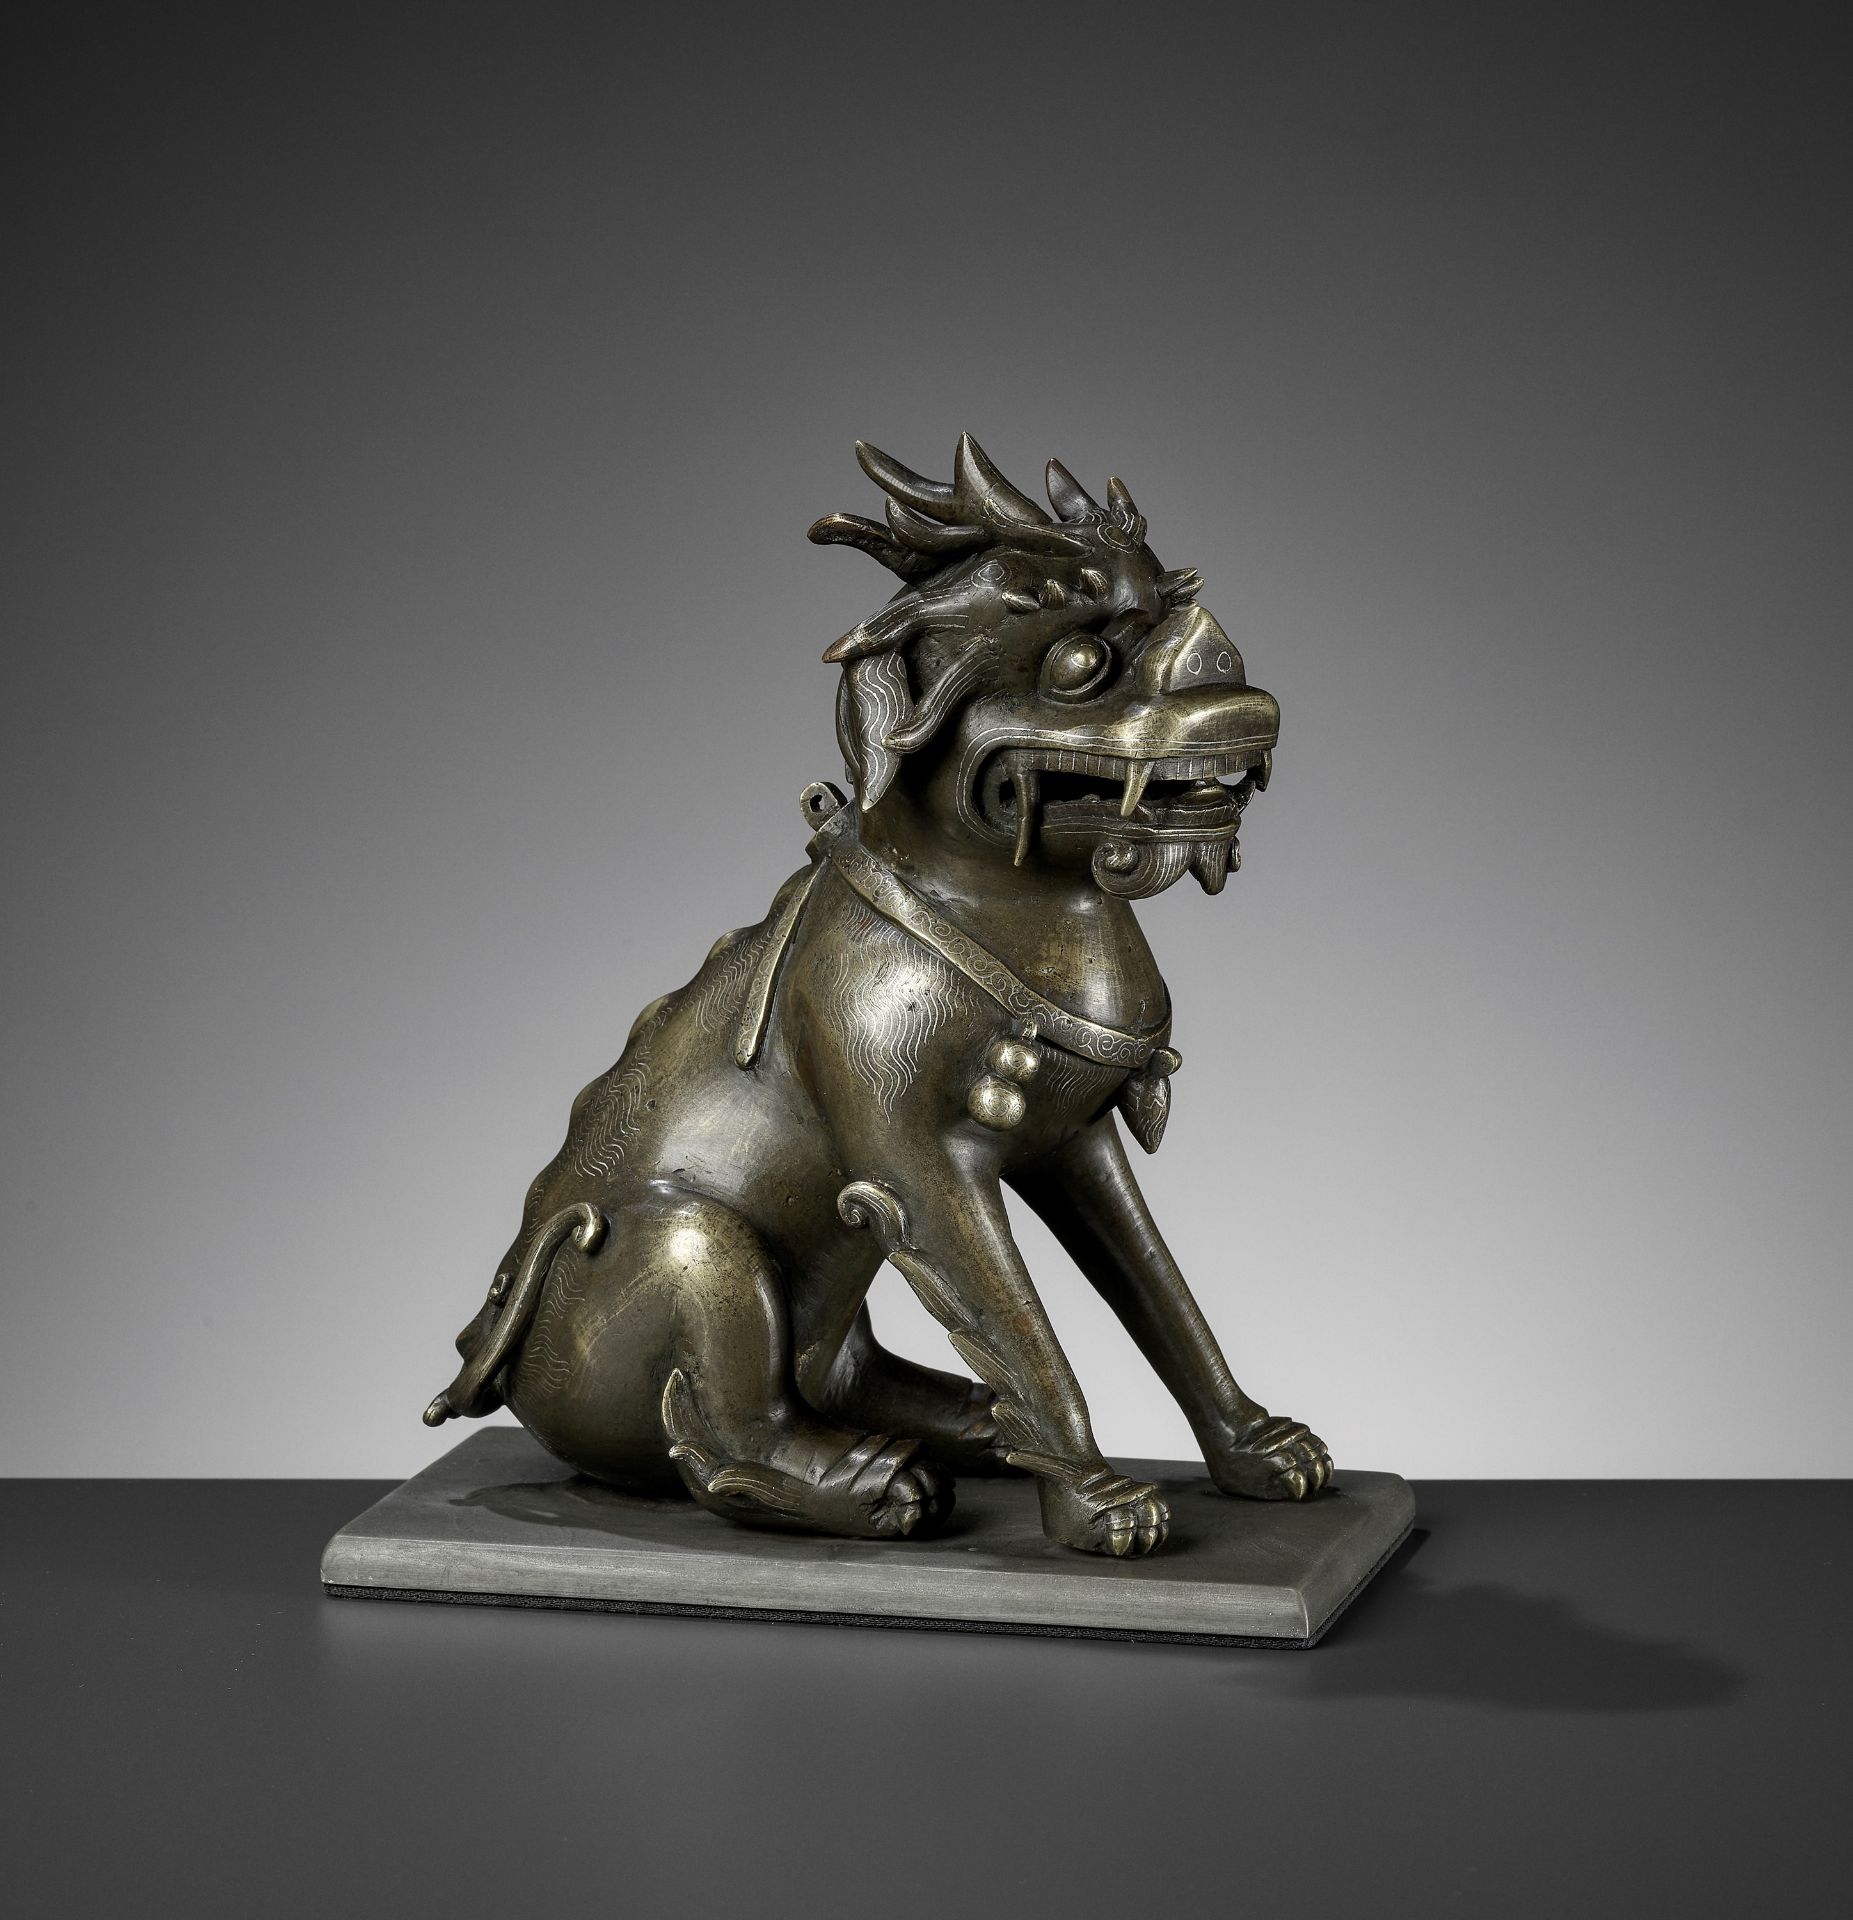 A SILVER WIRE-INLAID BRONZE FIGURE OF A QILIN, ATTRIBUTED TO SHISOU, QING DYNASTY